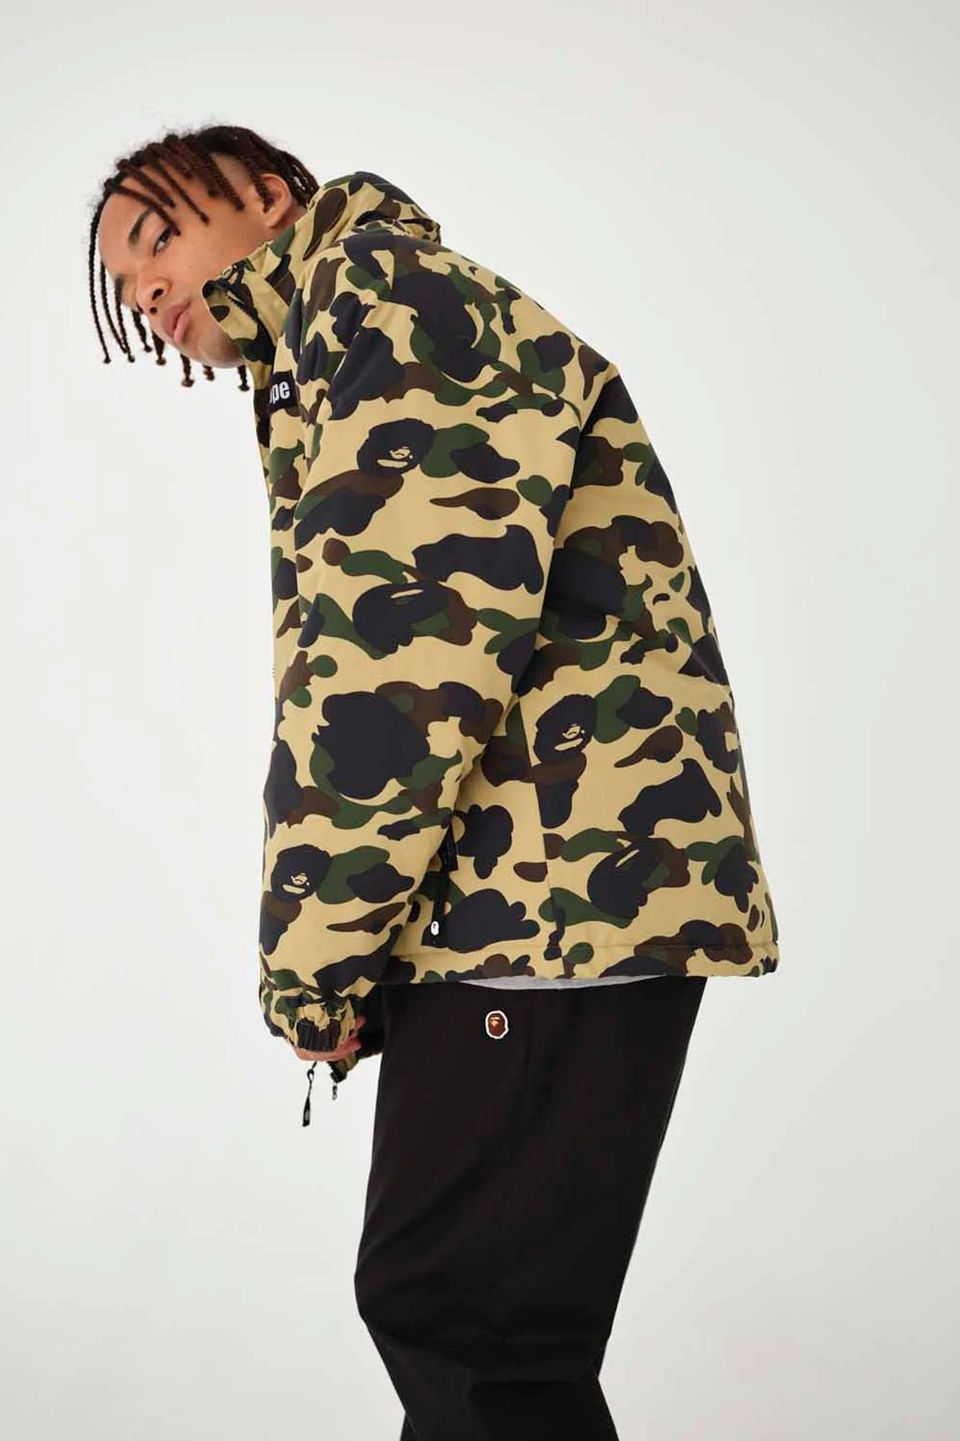 BAPE's Fall/Winter 2022 Collection Revives Archival Camo Patterns